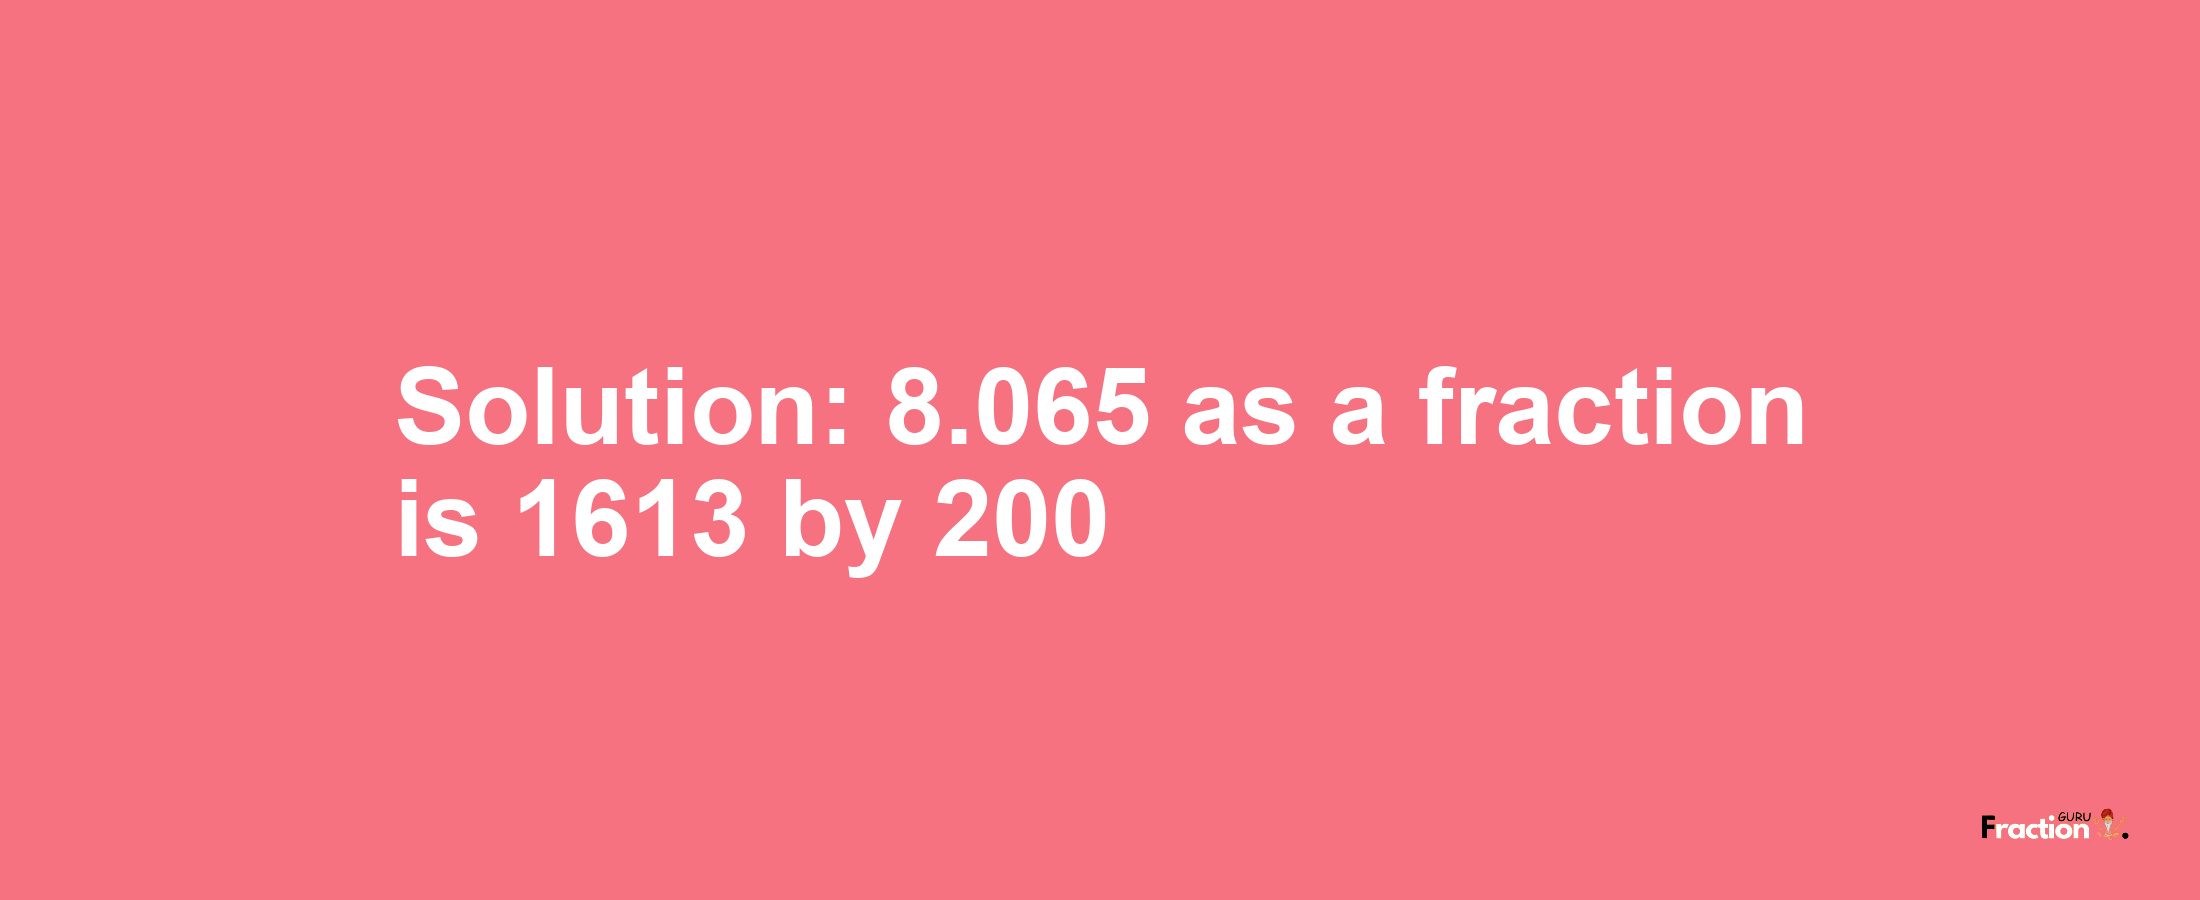 Solution:8.065 as a fraction is 1613/200